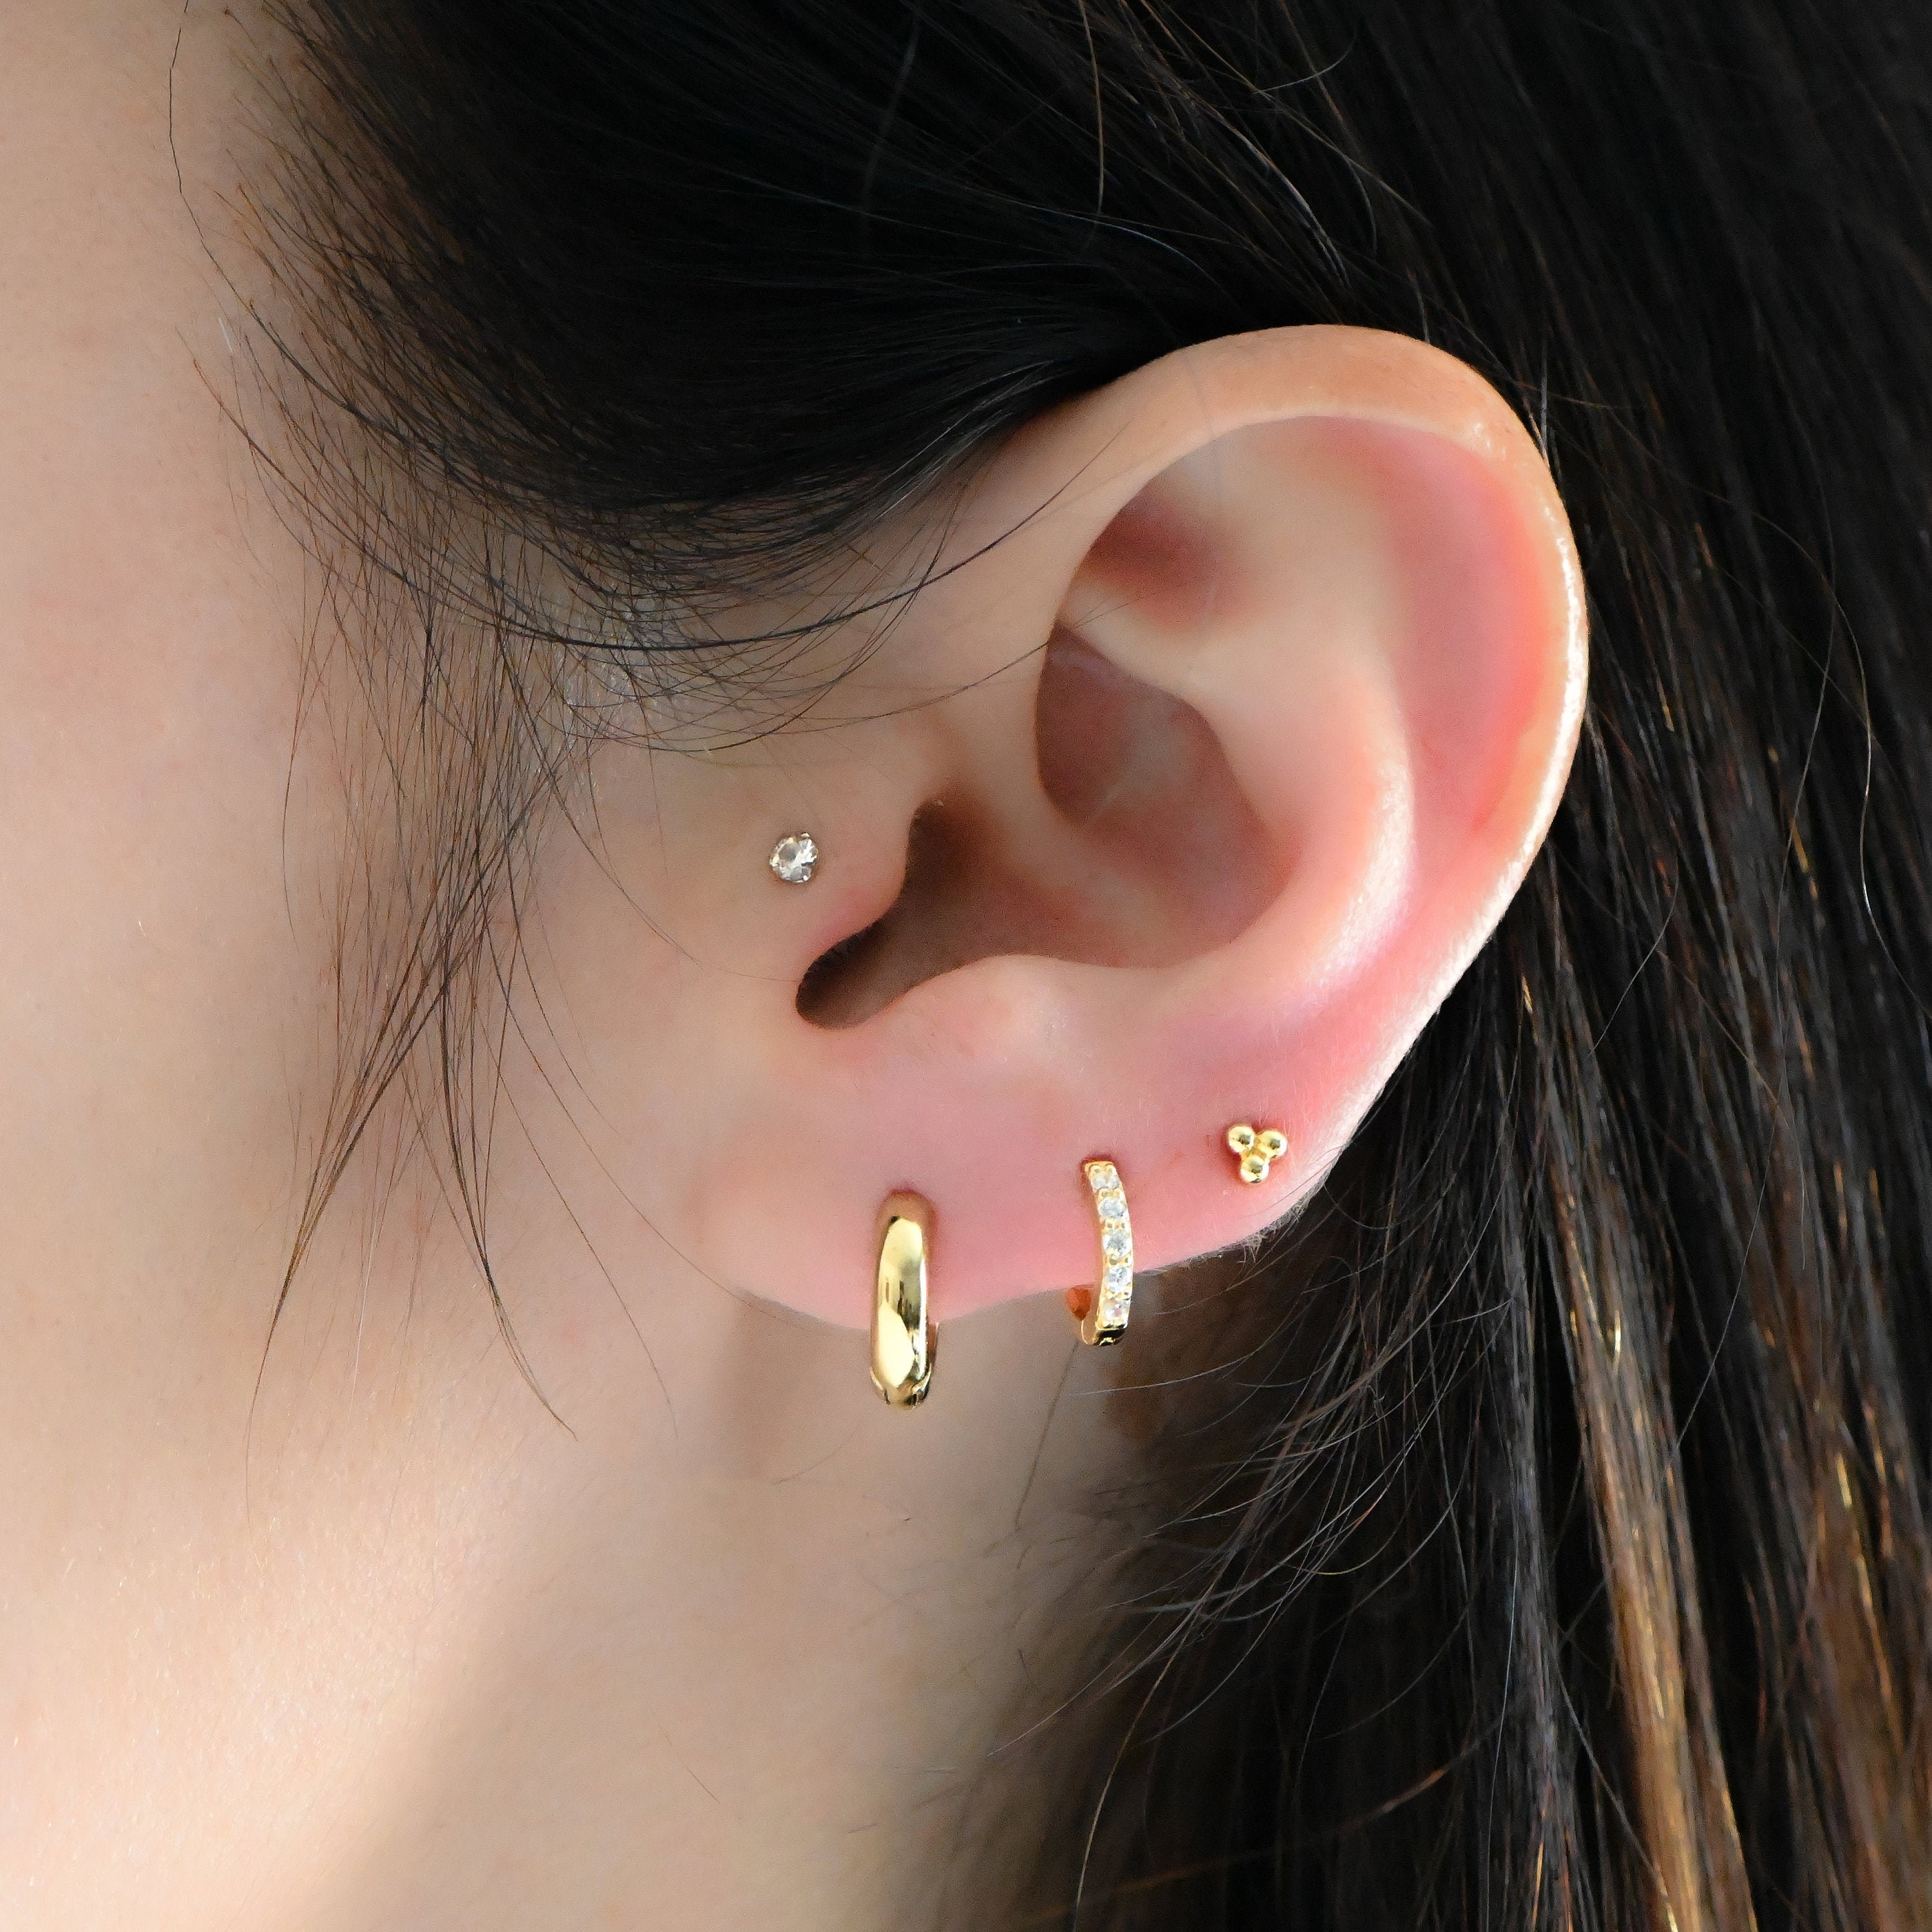 Aggregate more than 117 gold ring earrings best